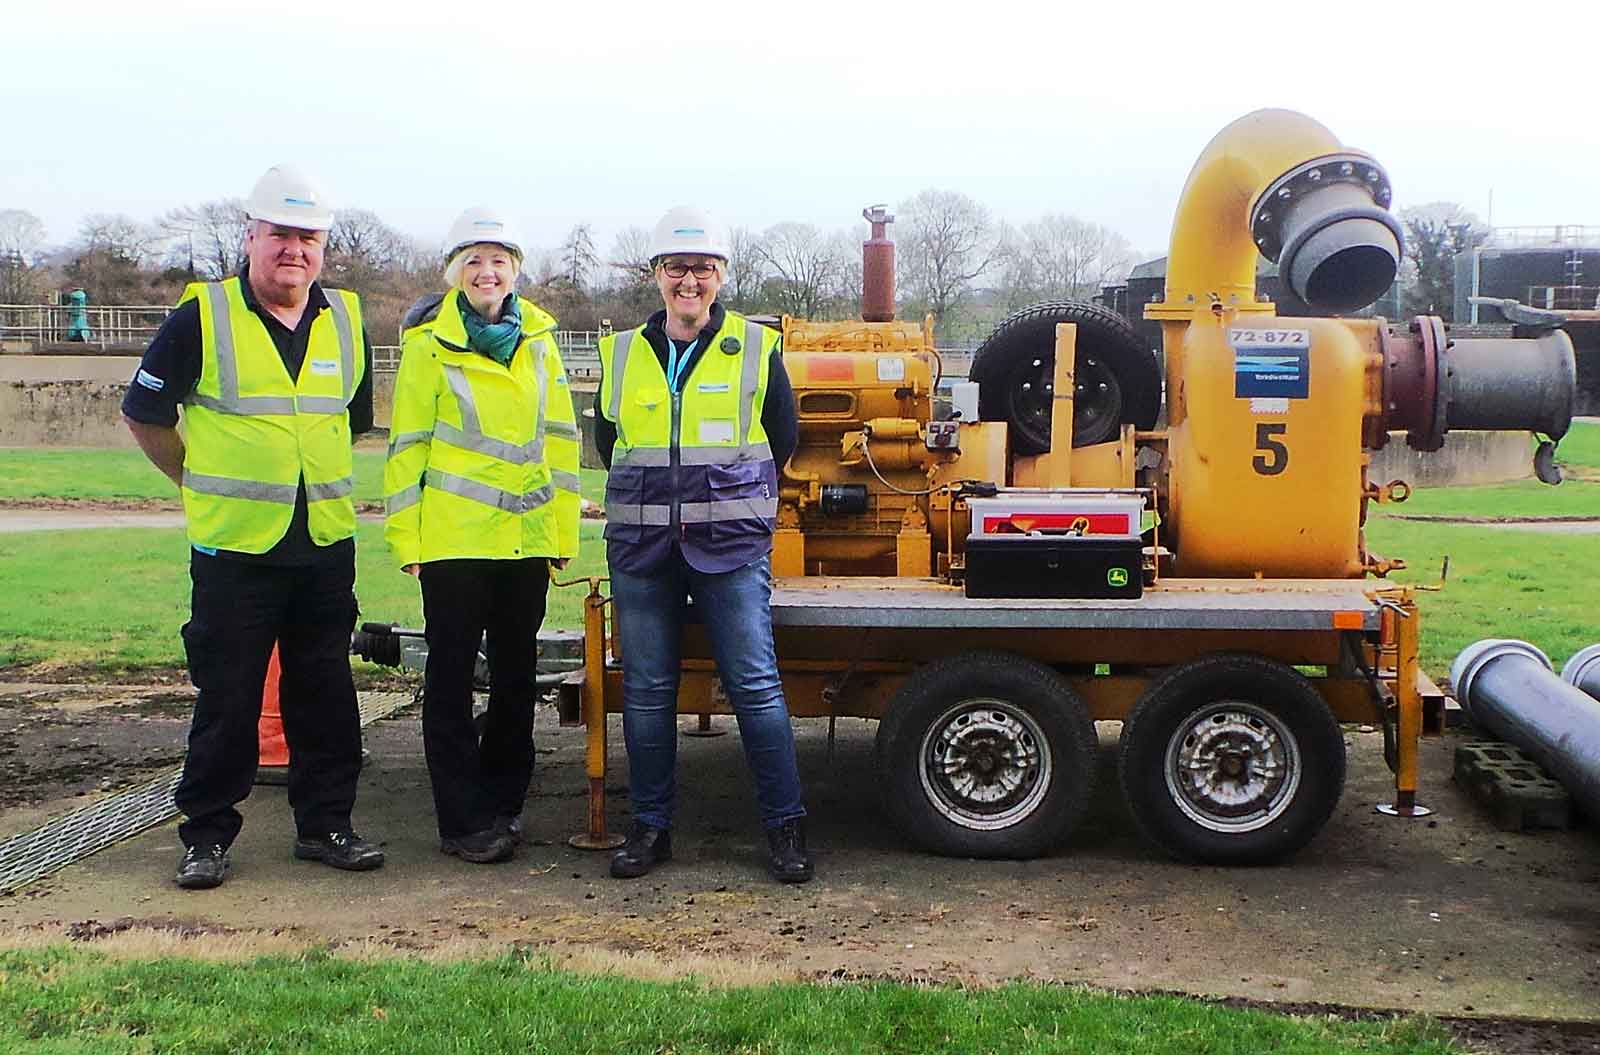 Brian Stott, Eve Pierrepont and Michelle Lovewell all from Yorkshire Water with one of the pumps